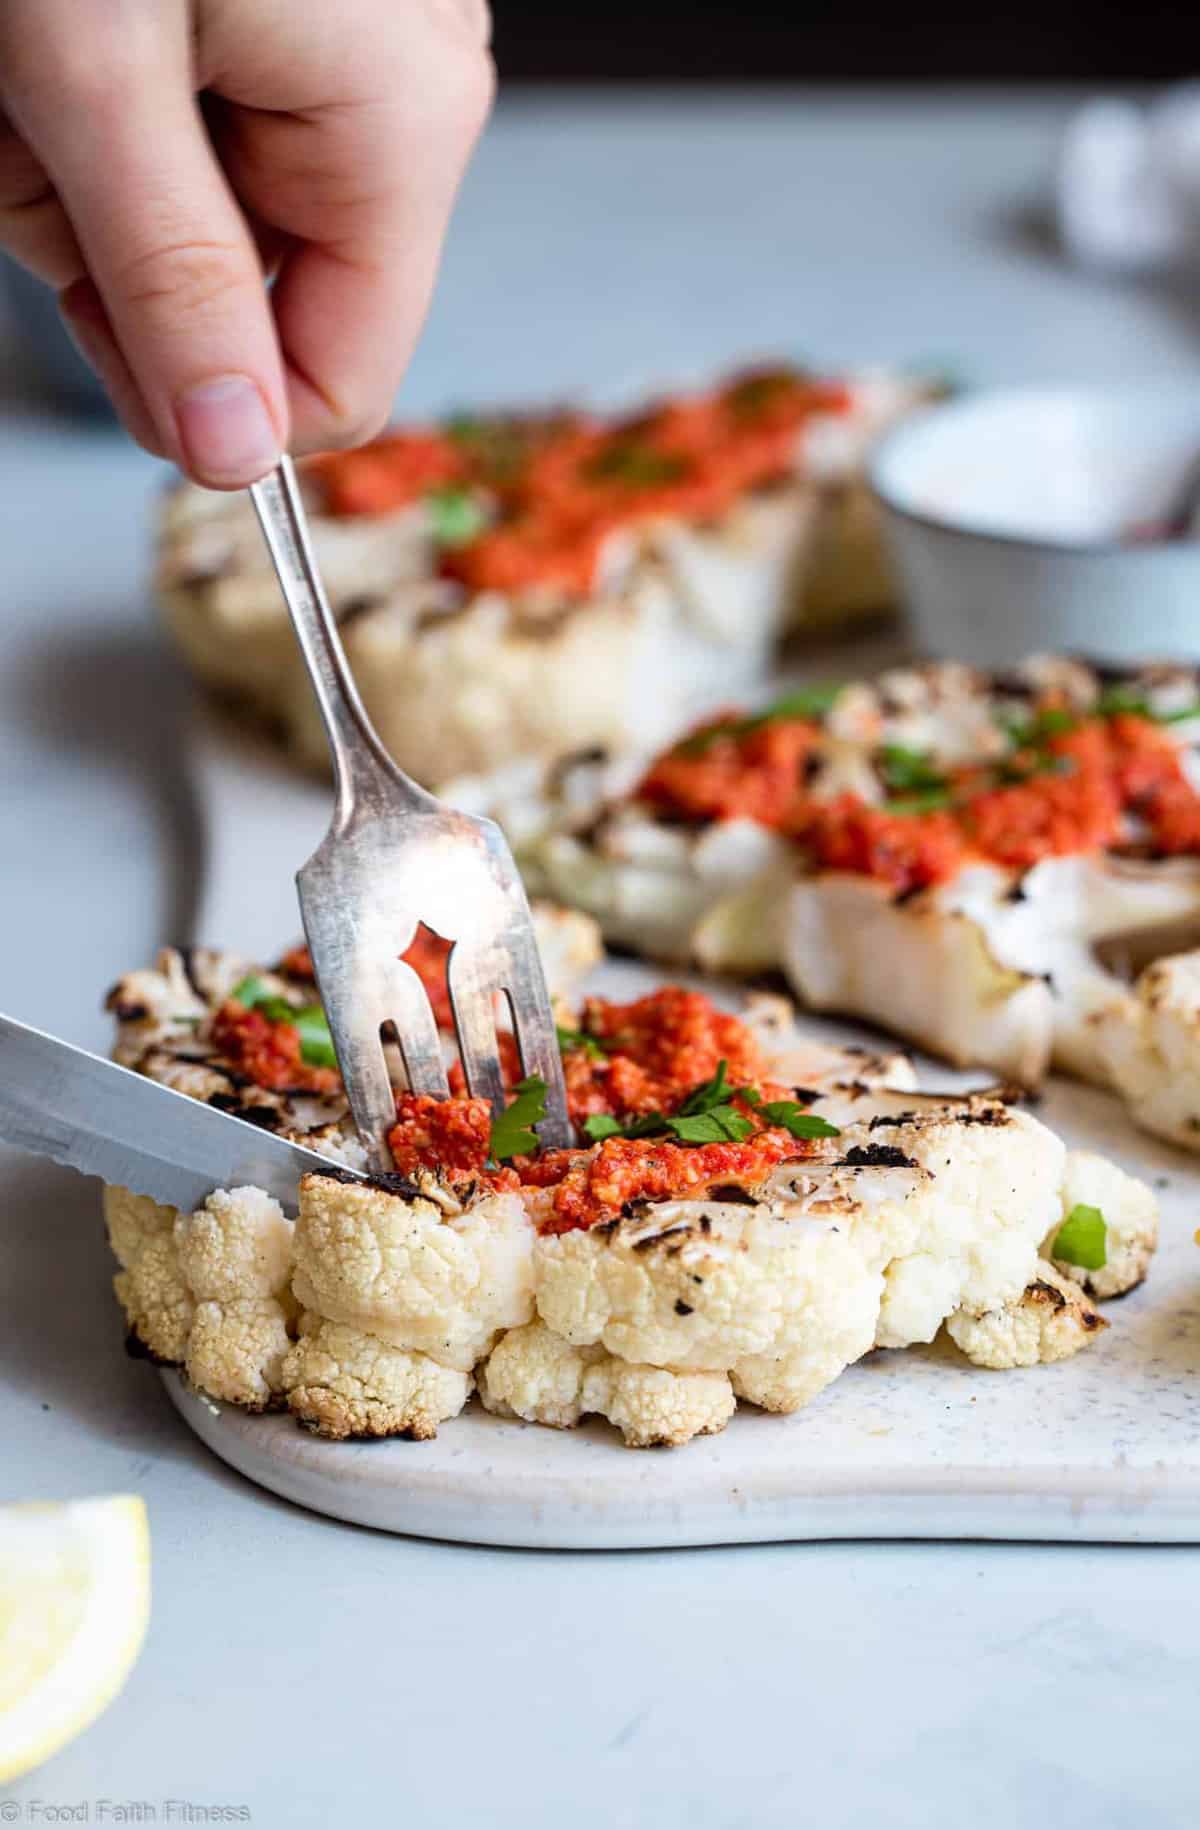 A fork and knife cutting into roasted cauliflower steak